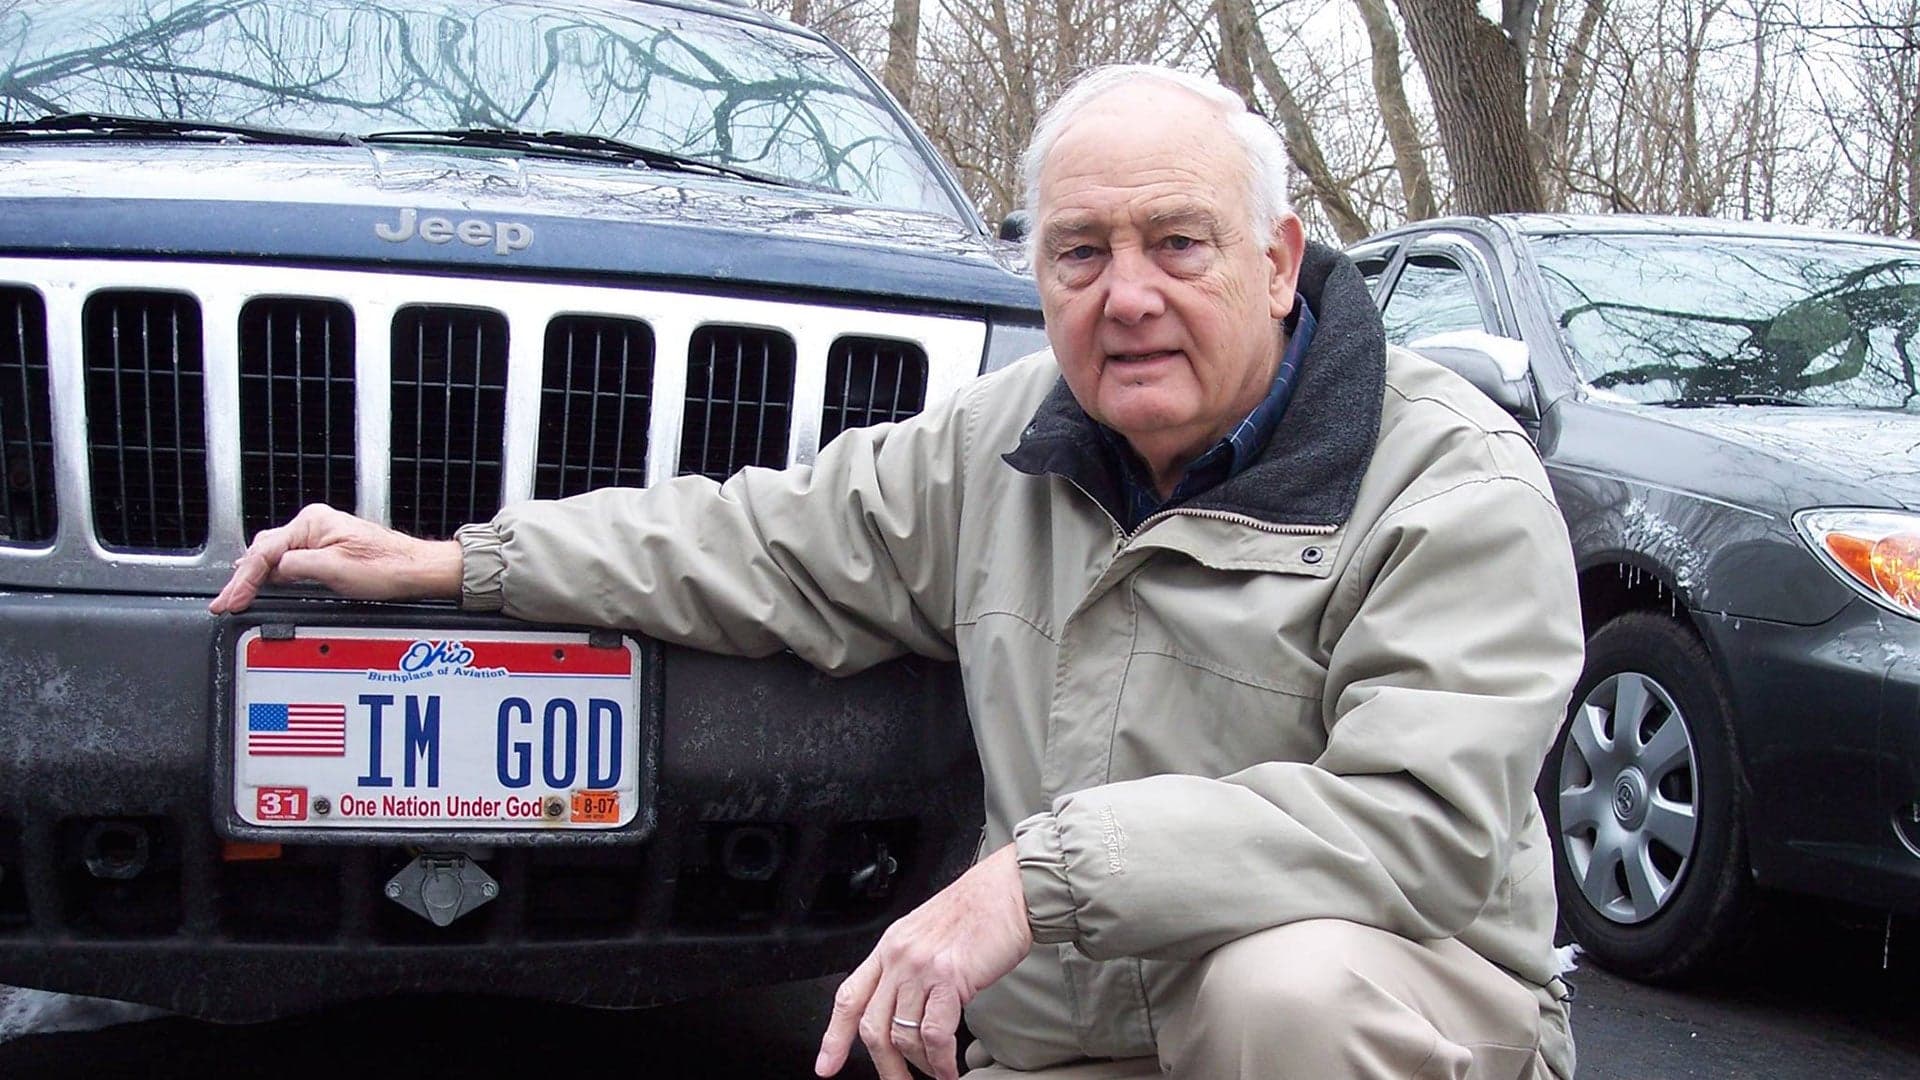 Kentucky Strikes Down Atheist’s Request for “IM GOD” License Plates